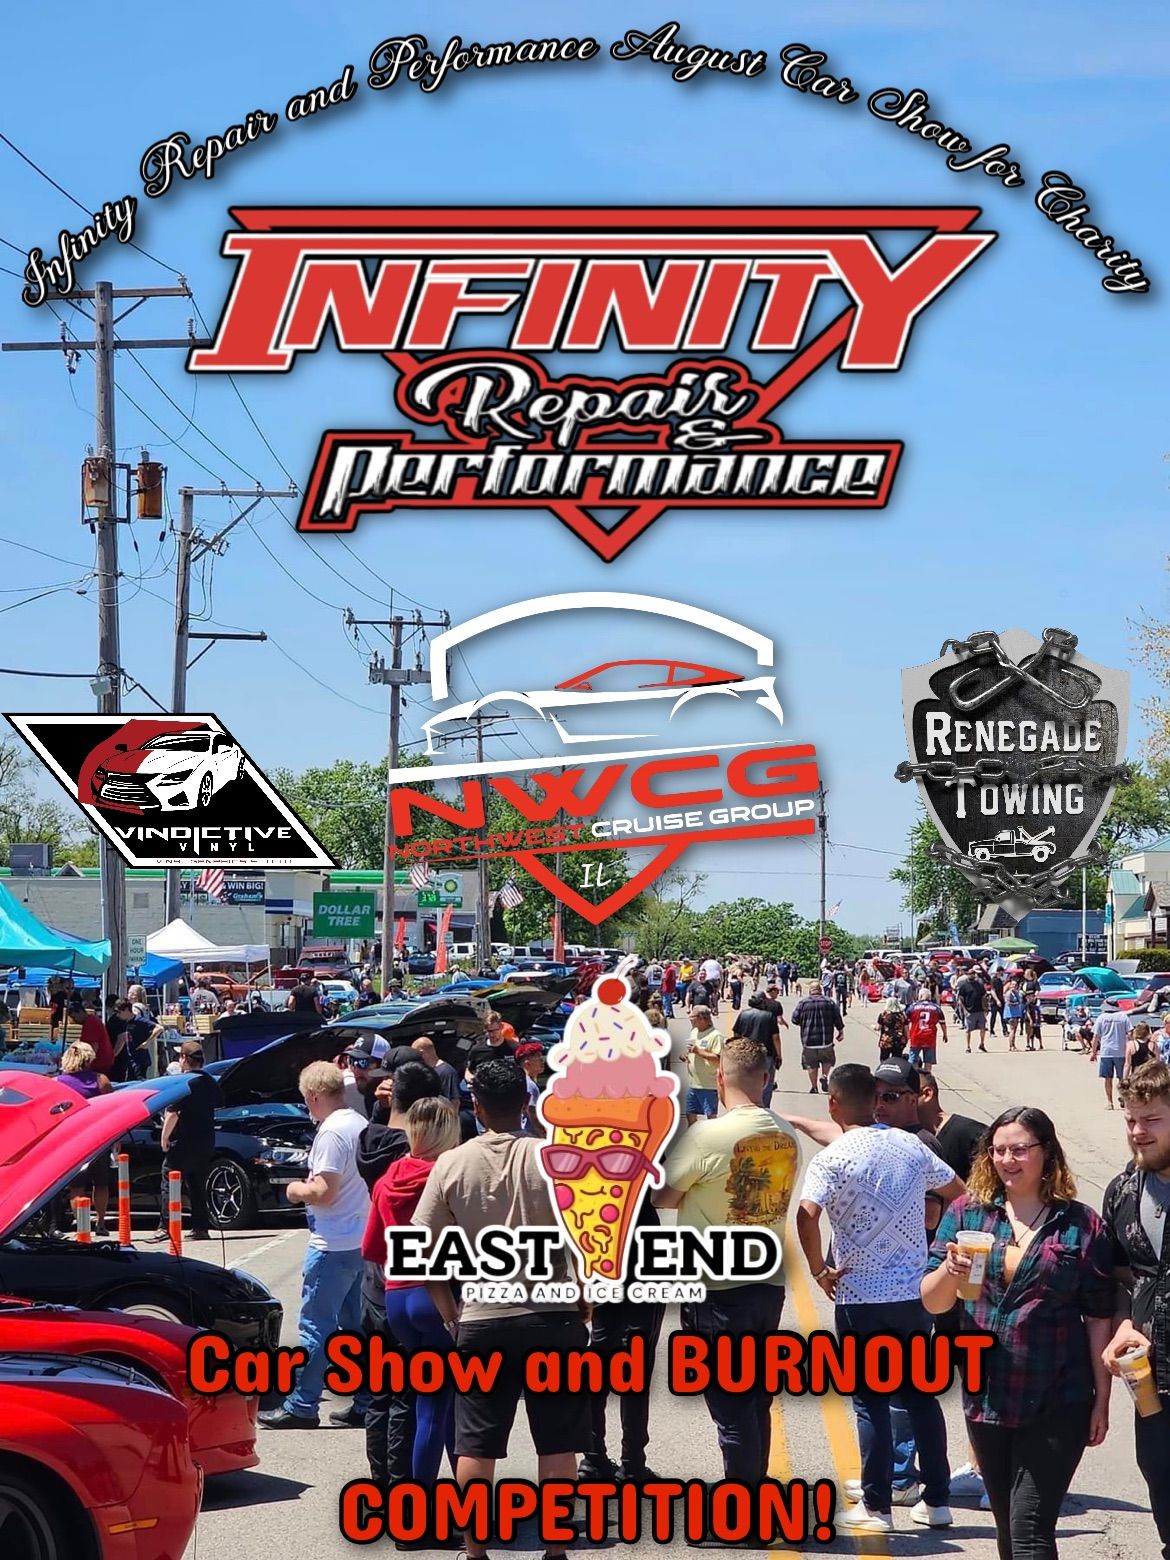 Infinity Repair and Performance Wonder lake Car show and Burnout Competition for charity